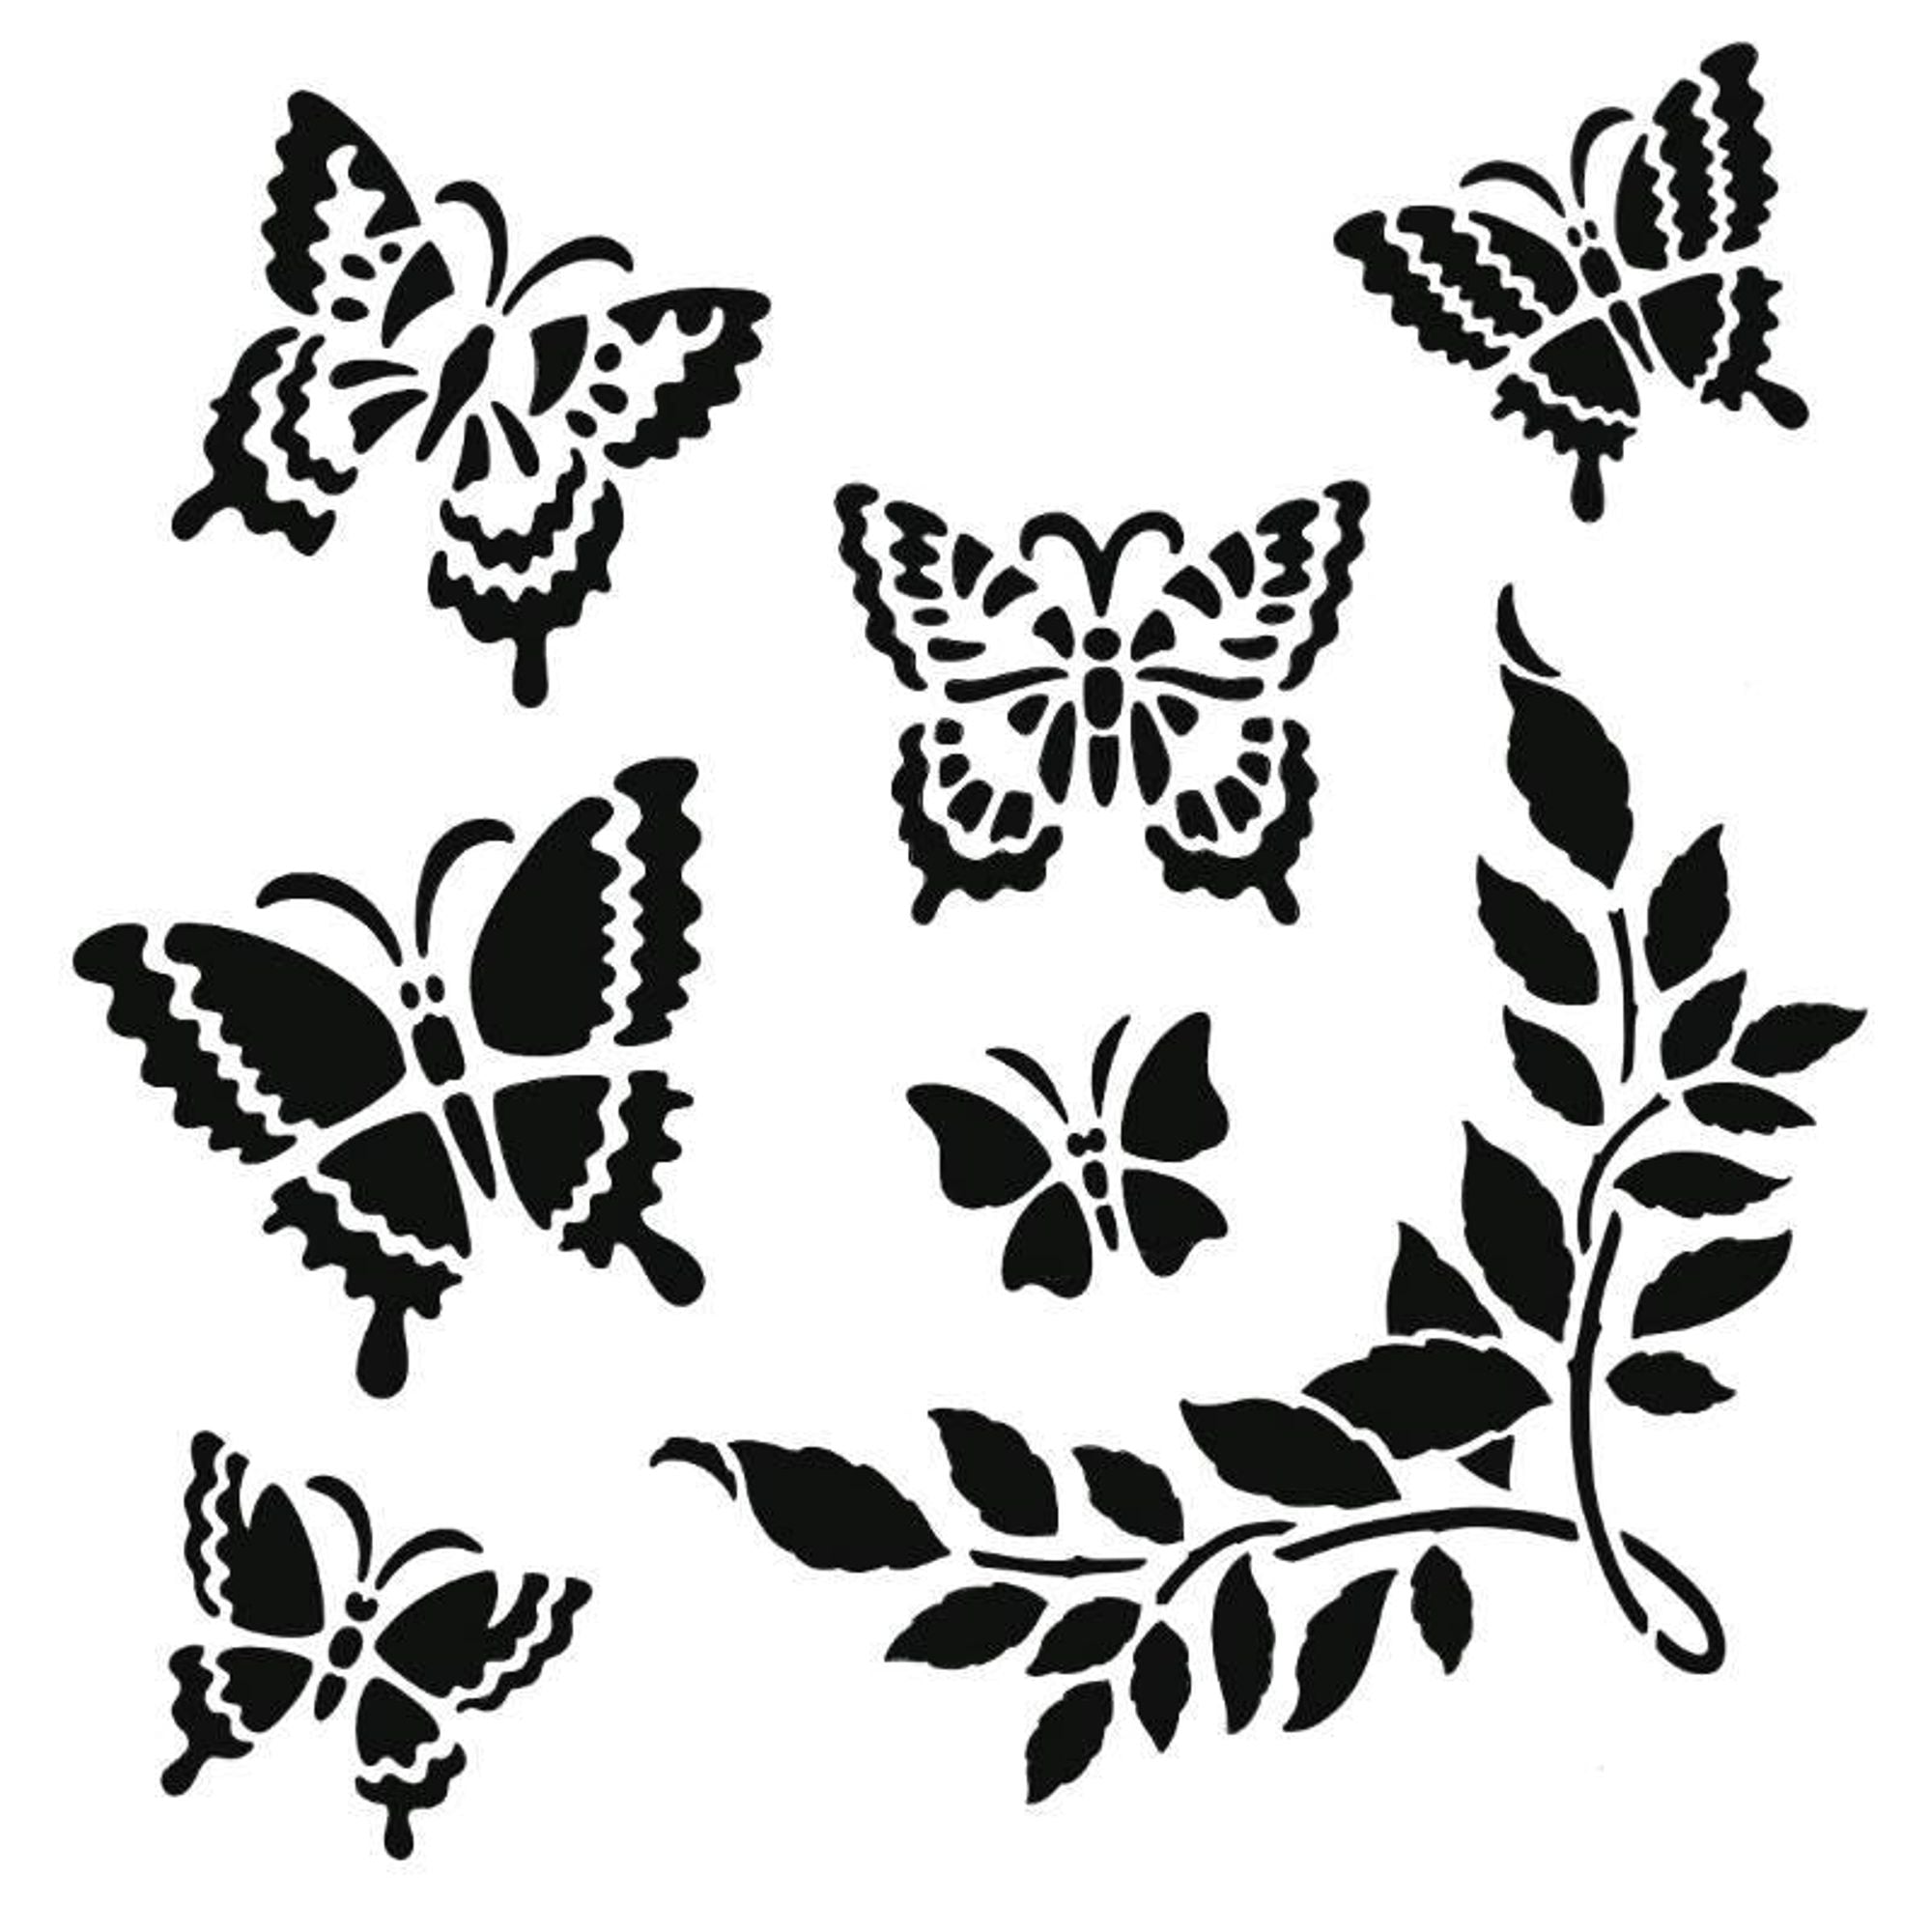 Creative Expressions Graceful Butterflies 7 in x 7 in Stencil